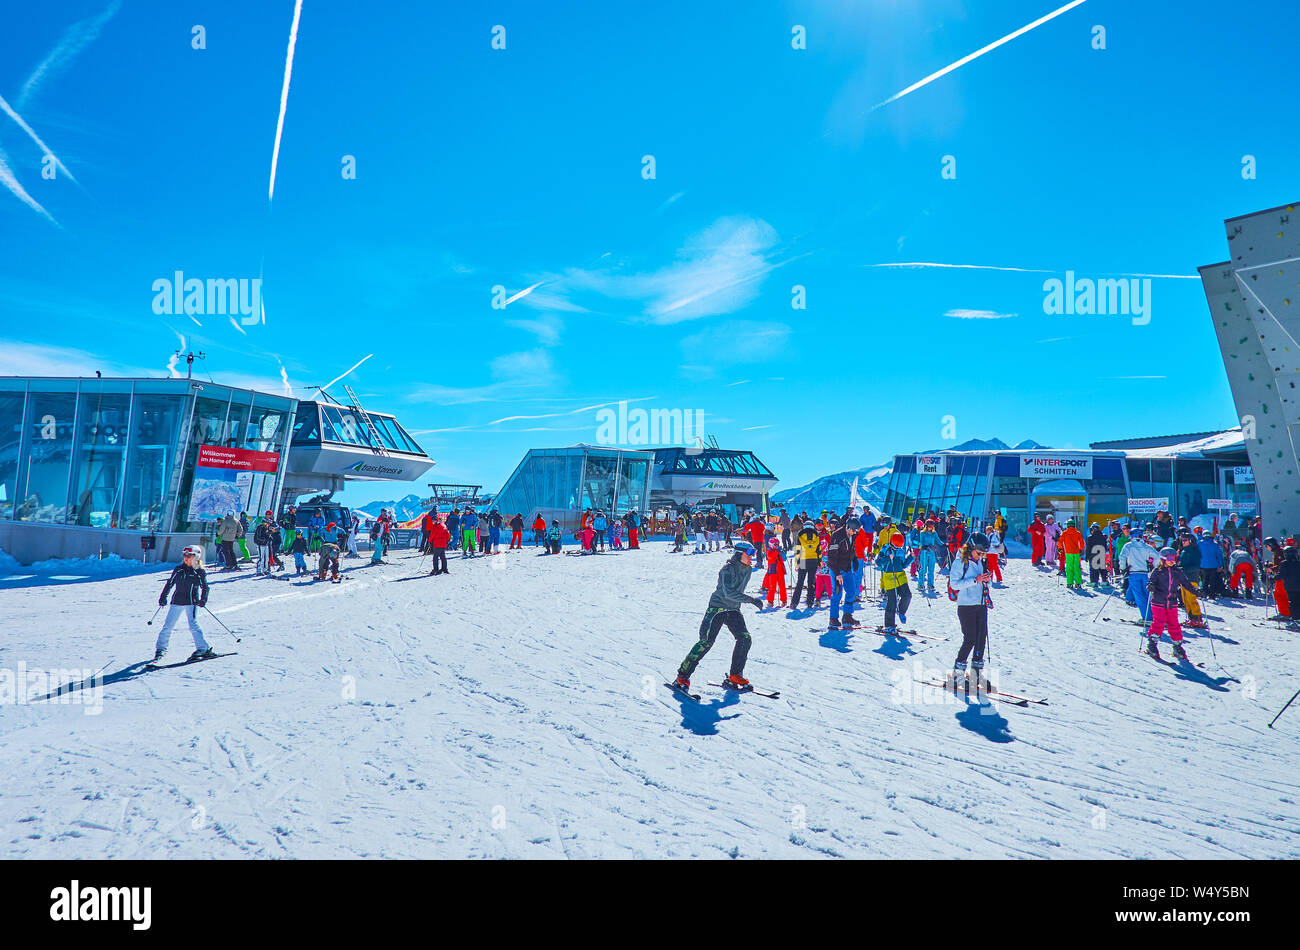 ZELL AM SEE, AUSTRIA - FEBRUARY 28, 2019: The upper stations of cableway routes of Zell am See air lifts network surround the crowded zone on slope of Stock Photo